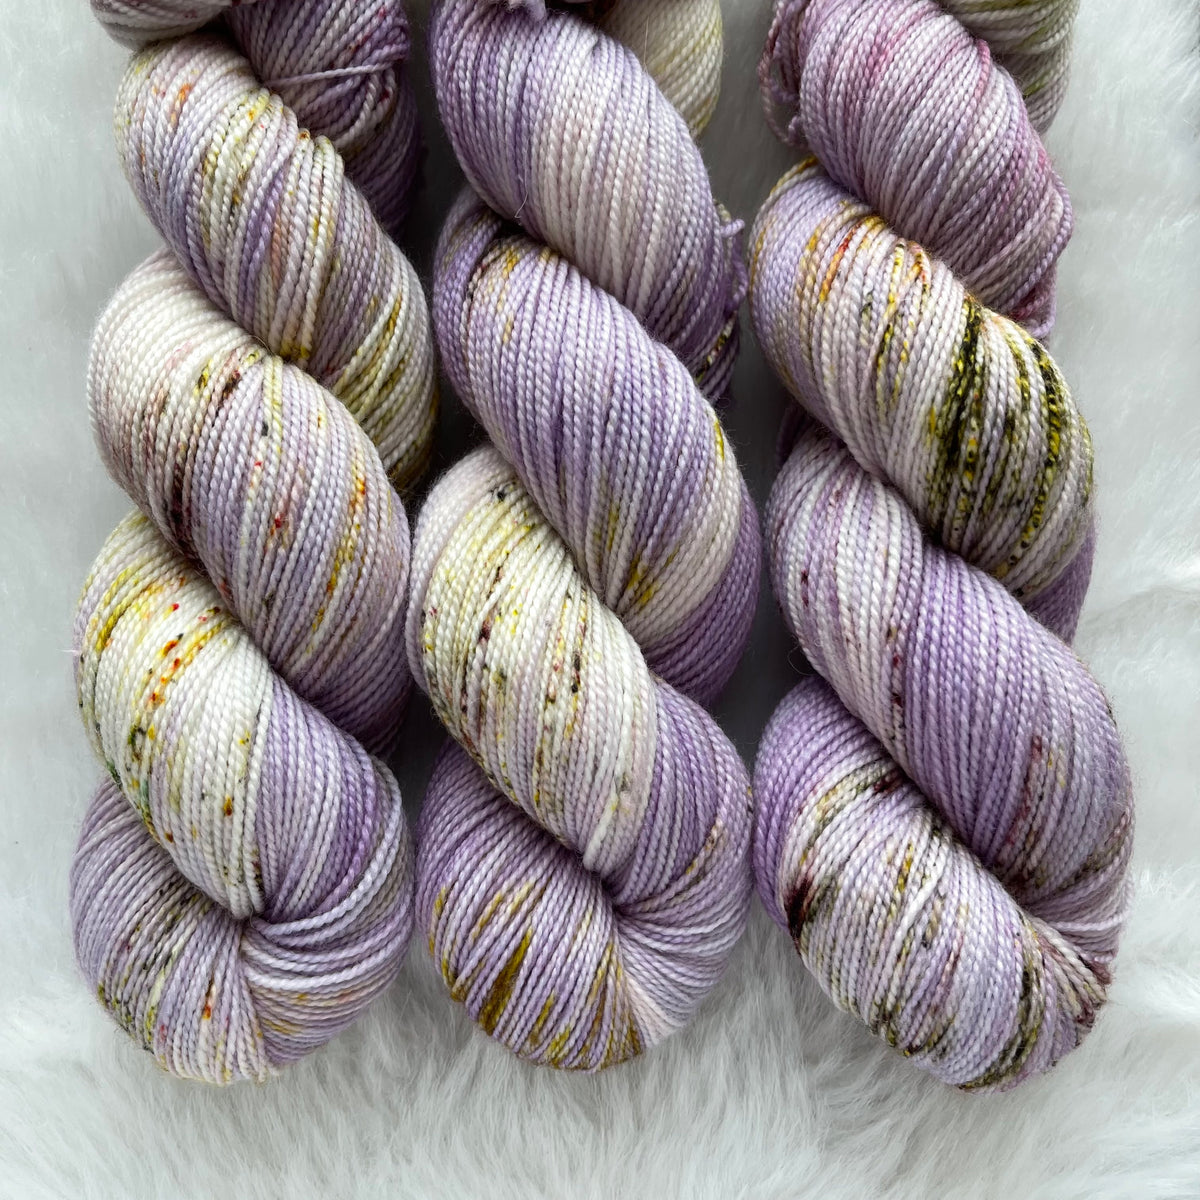 BUTTERFLY KISSES - Dyed to order- Hand Dyed Yarn Skein